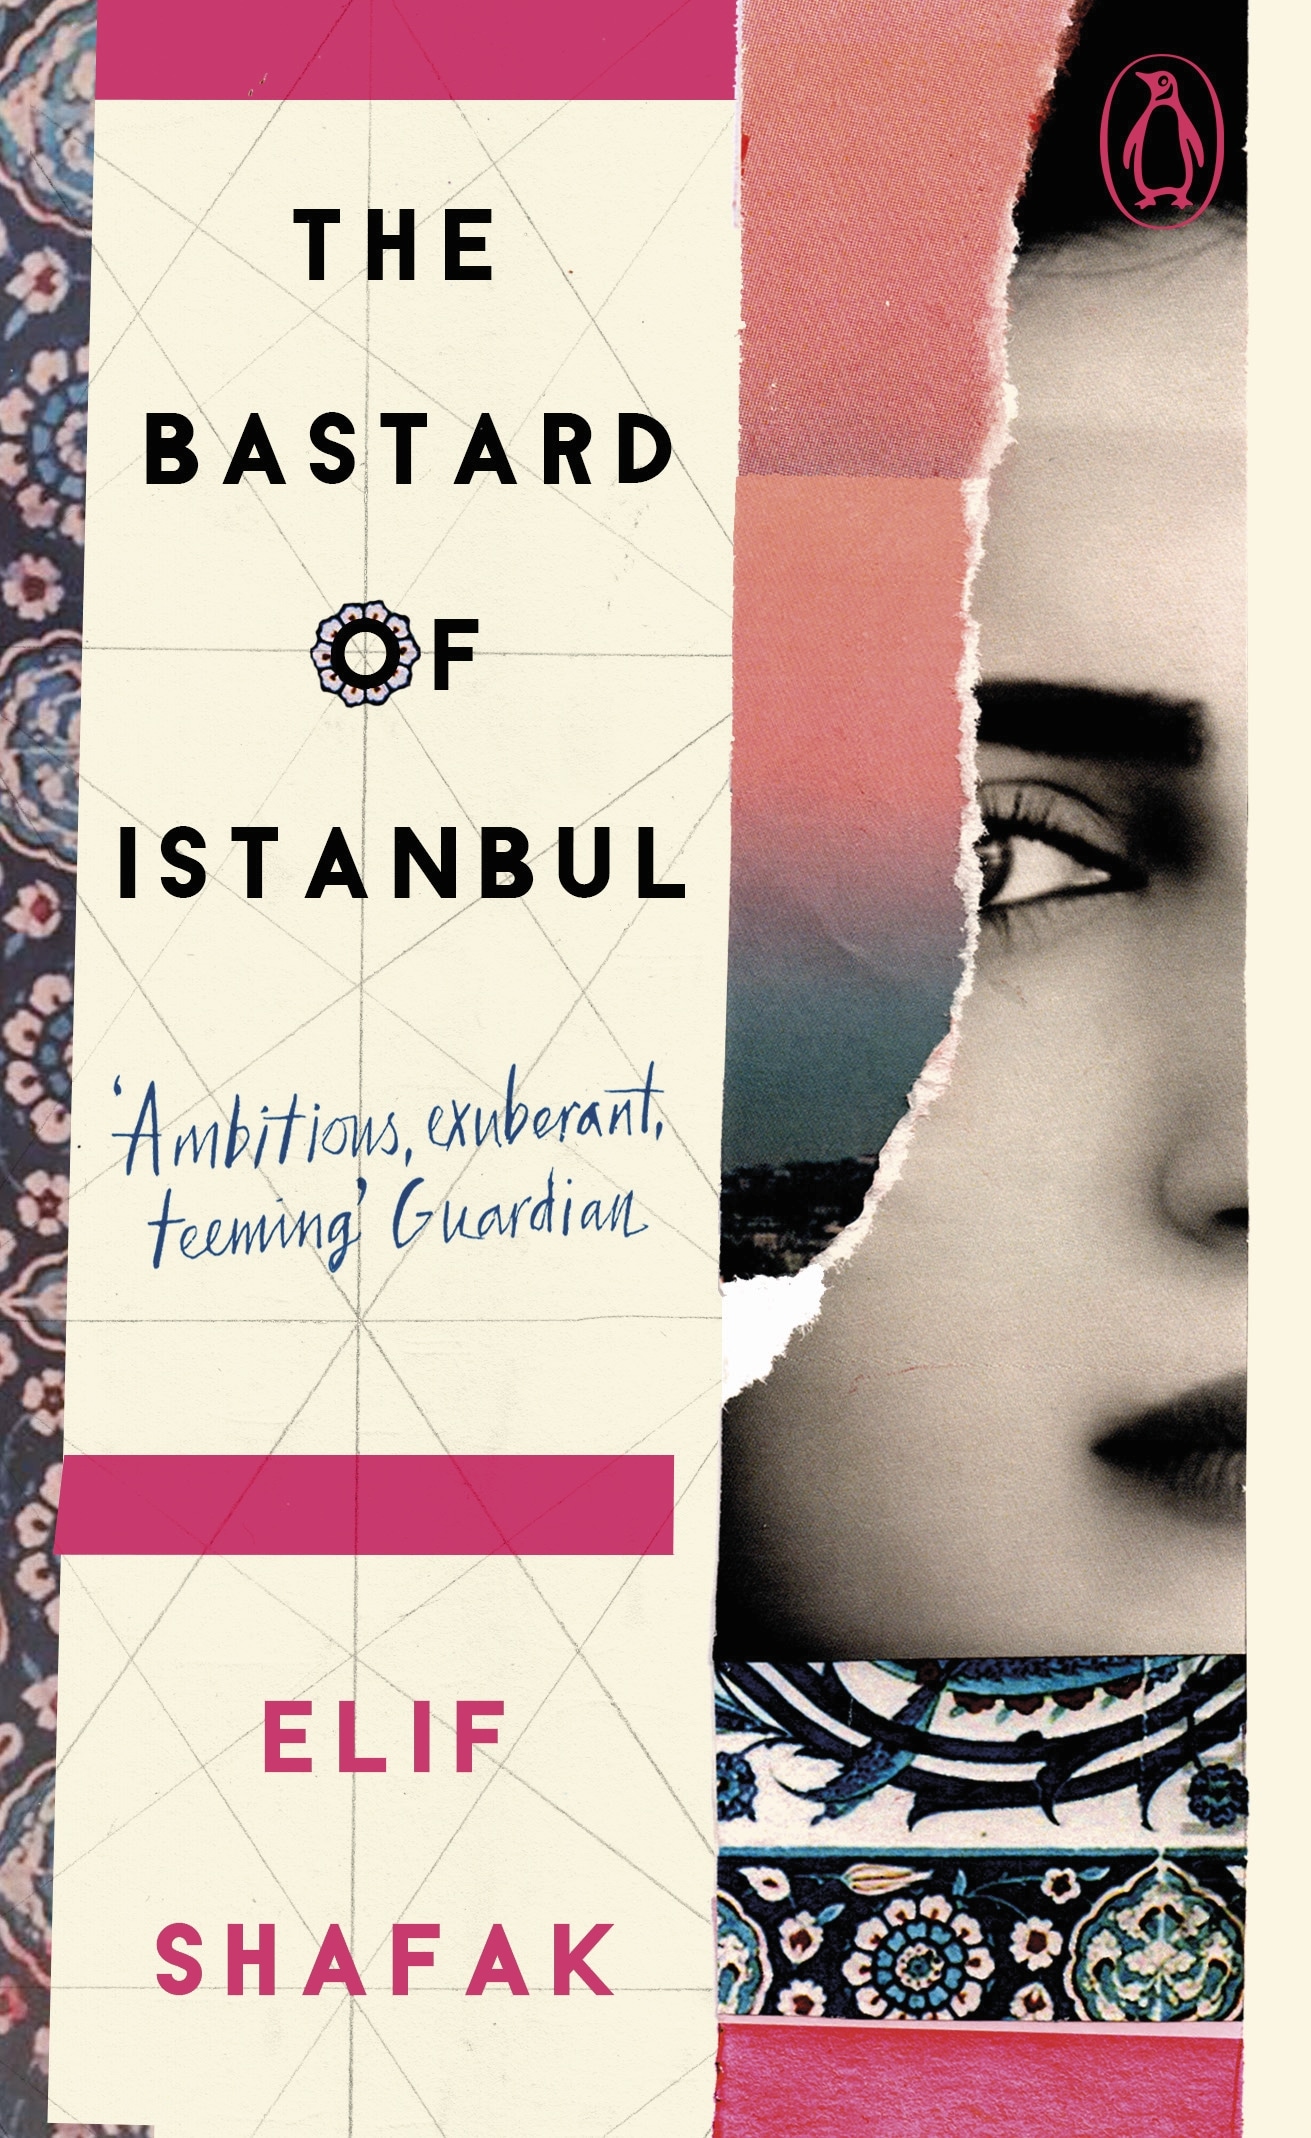 Book “The Bastard of Istanbul” by Elif Shafak — June 6, 2019